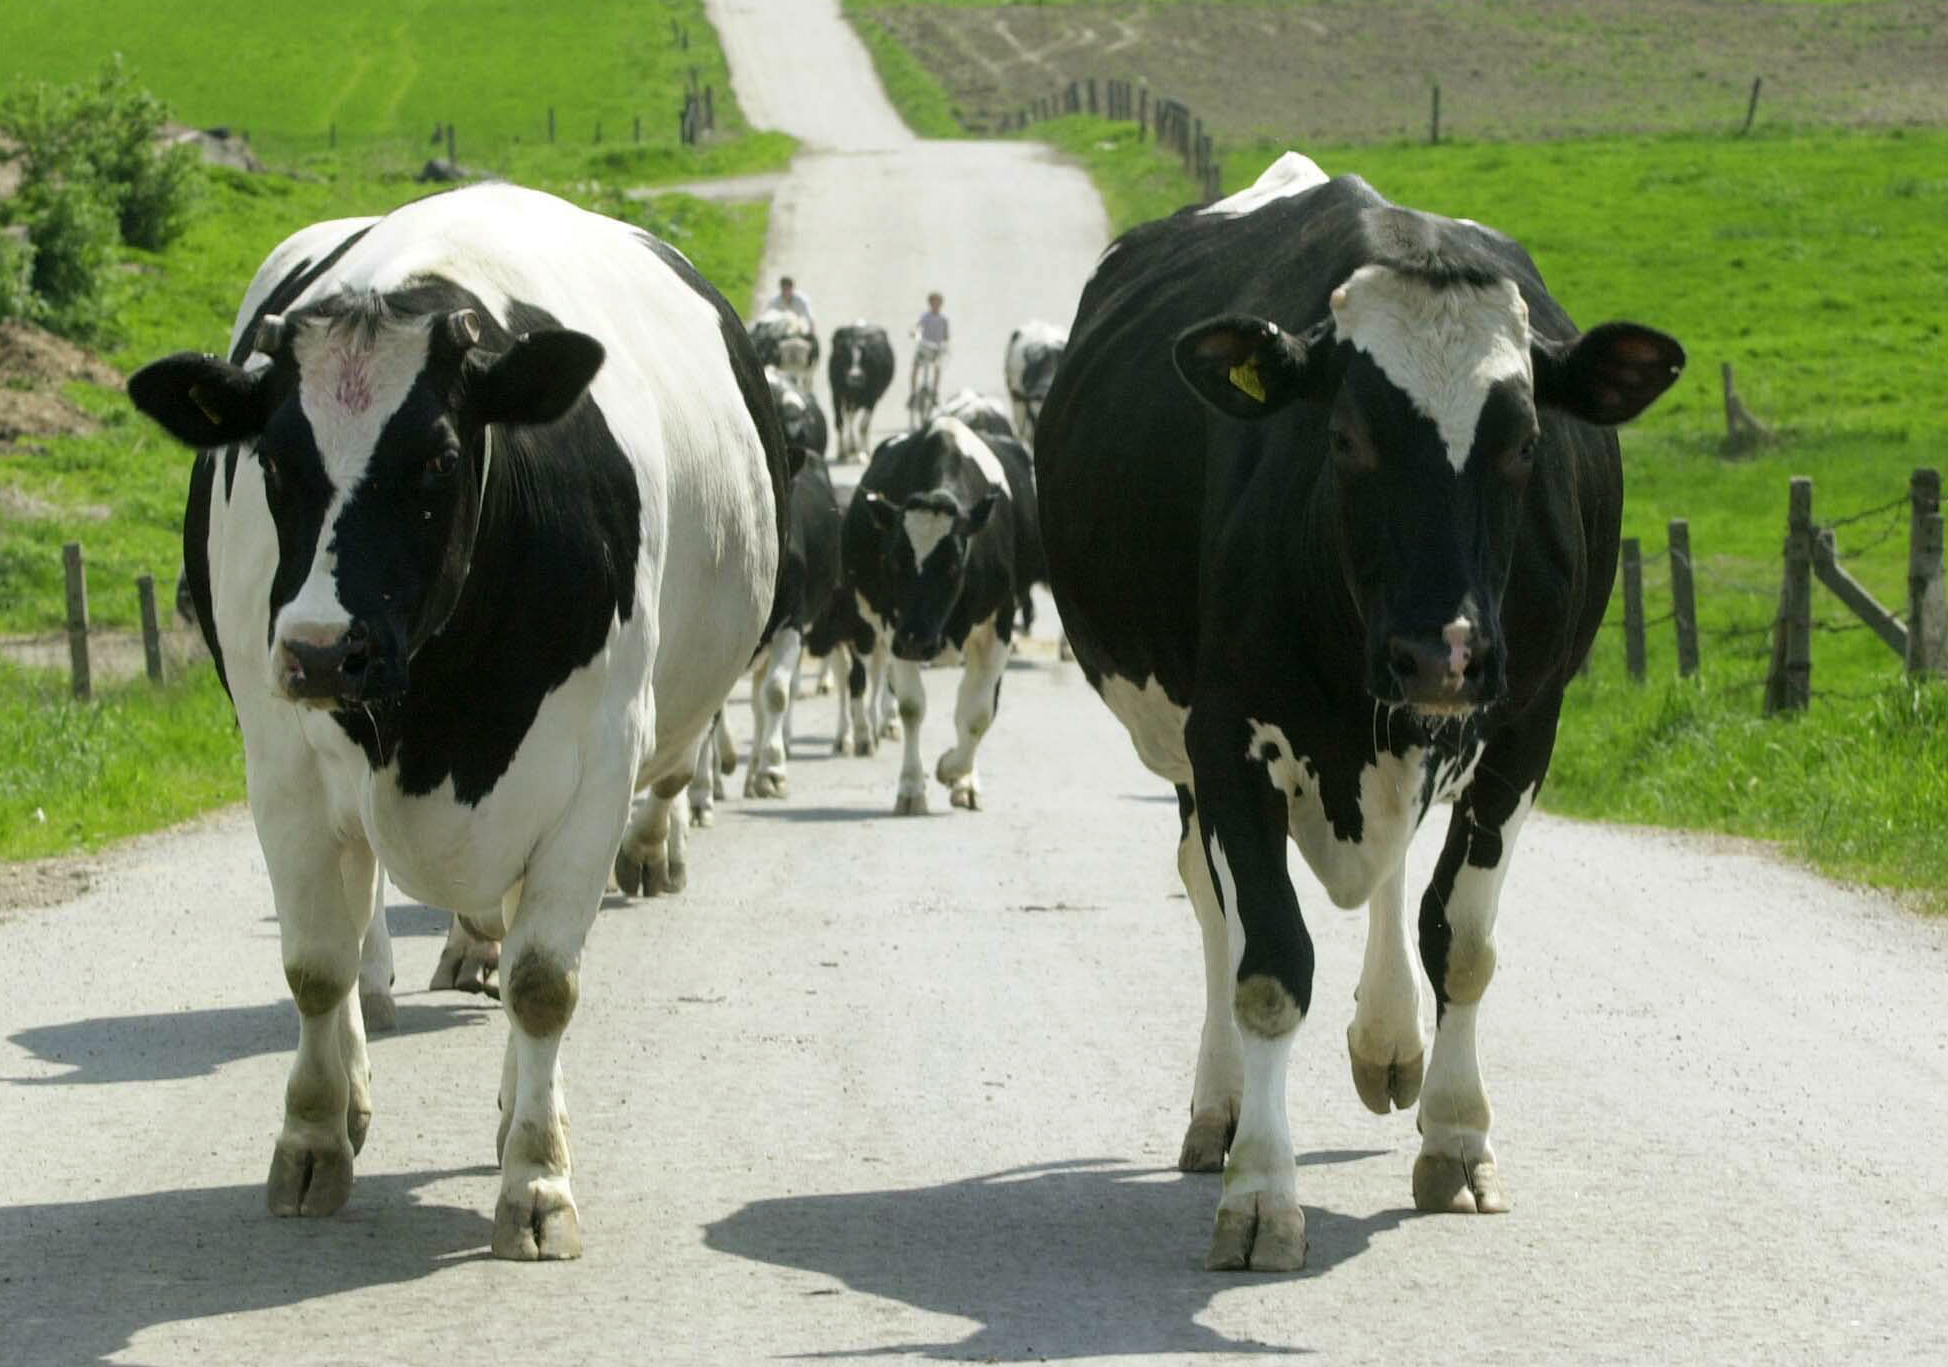 Poland exported 5,500 pounds of meat from sick cows to EU